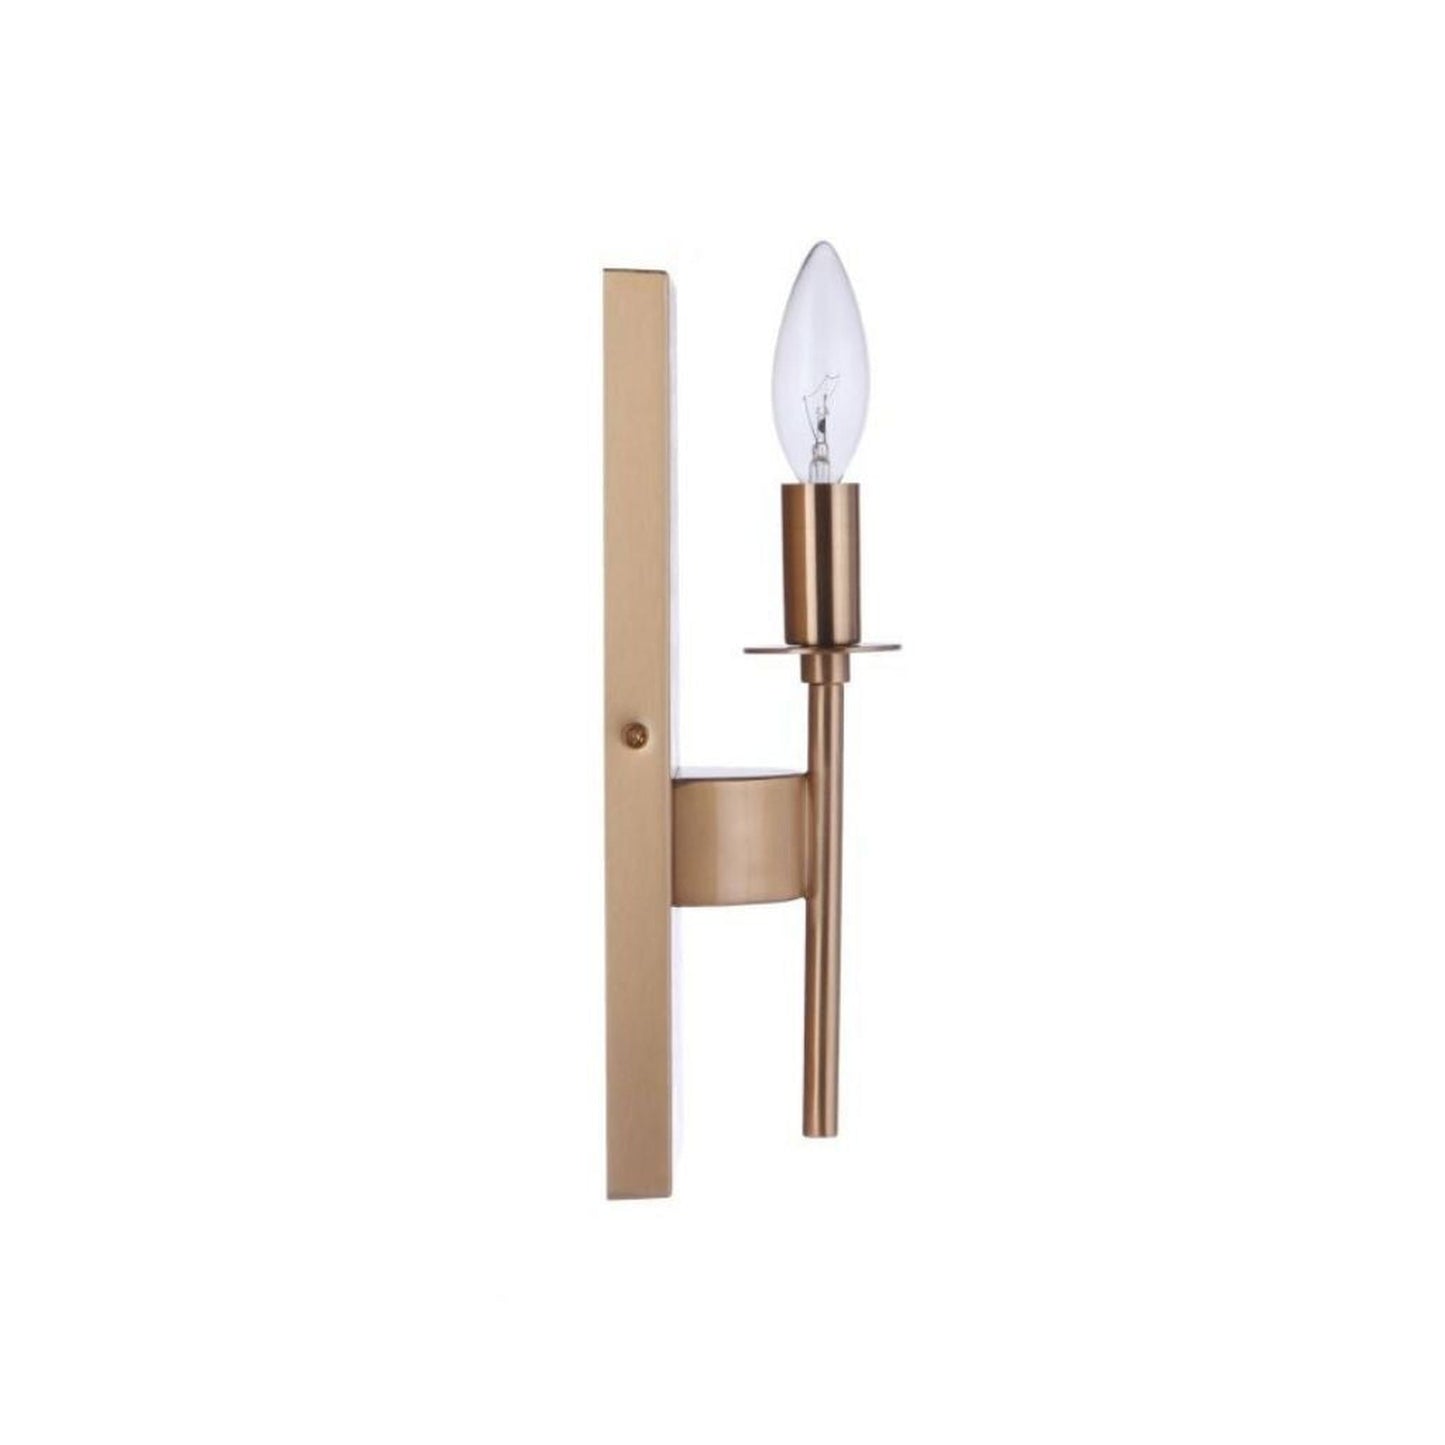 Craftmade Larrson 5" x 11" 1-Light Satin Brass Candle-Style Wall Sconce